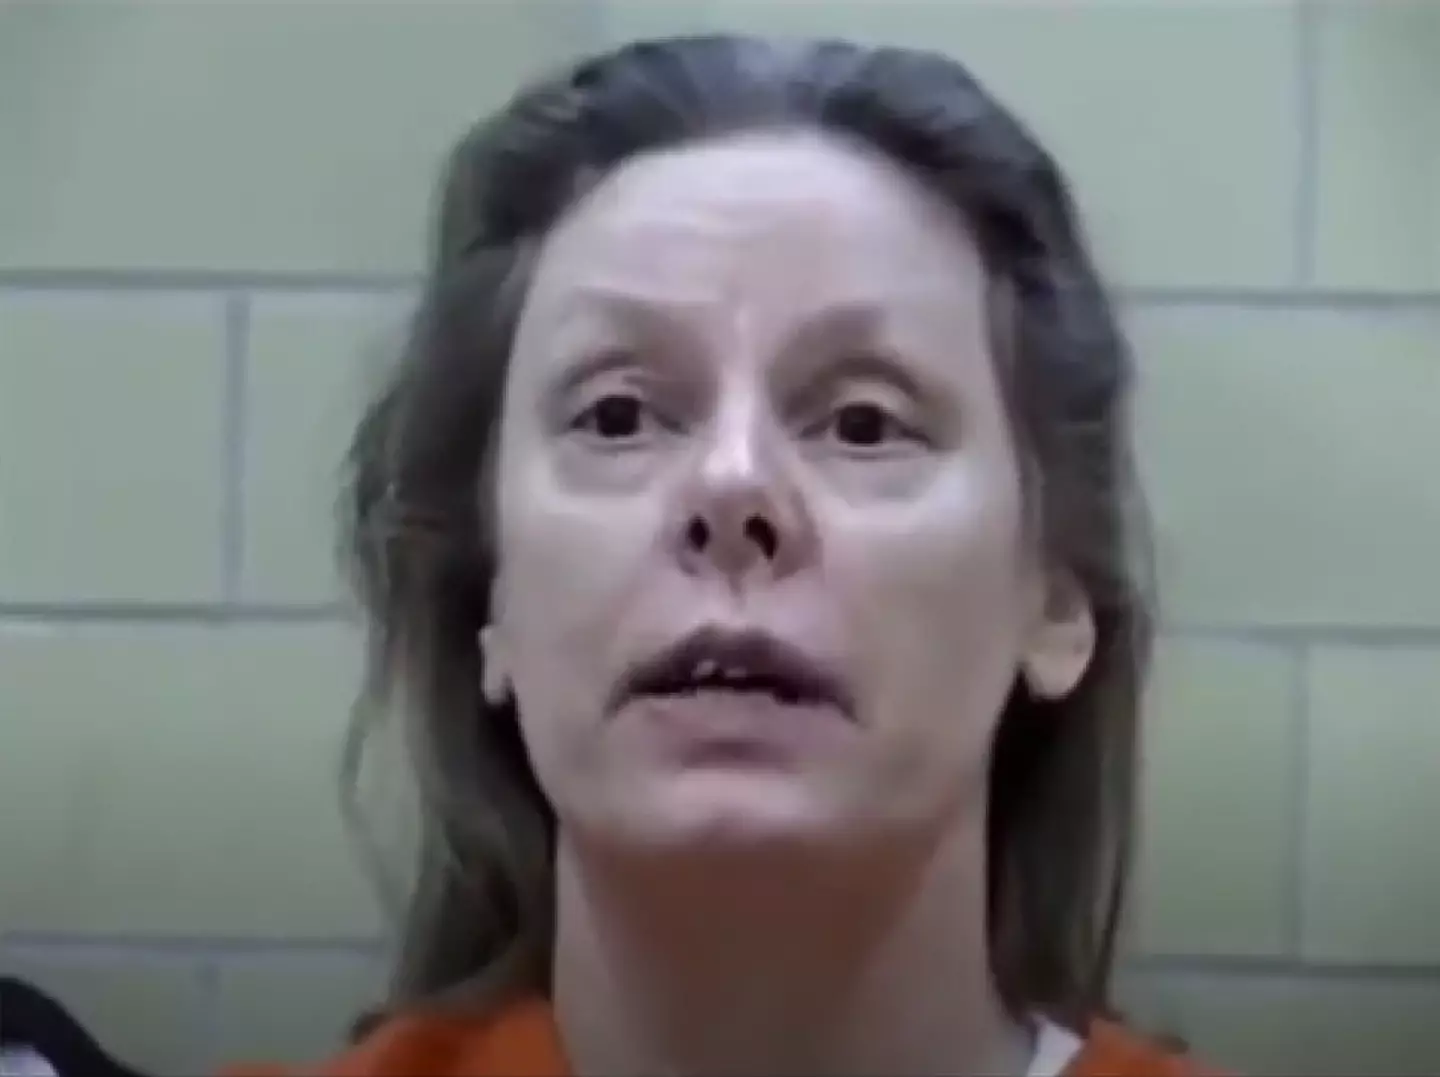 The day before her execution for multiple murders, Aileen Wuornos claimed she 'did the right thing'.